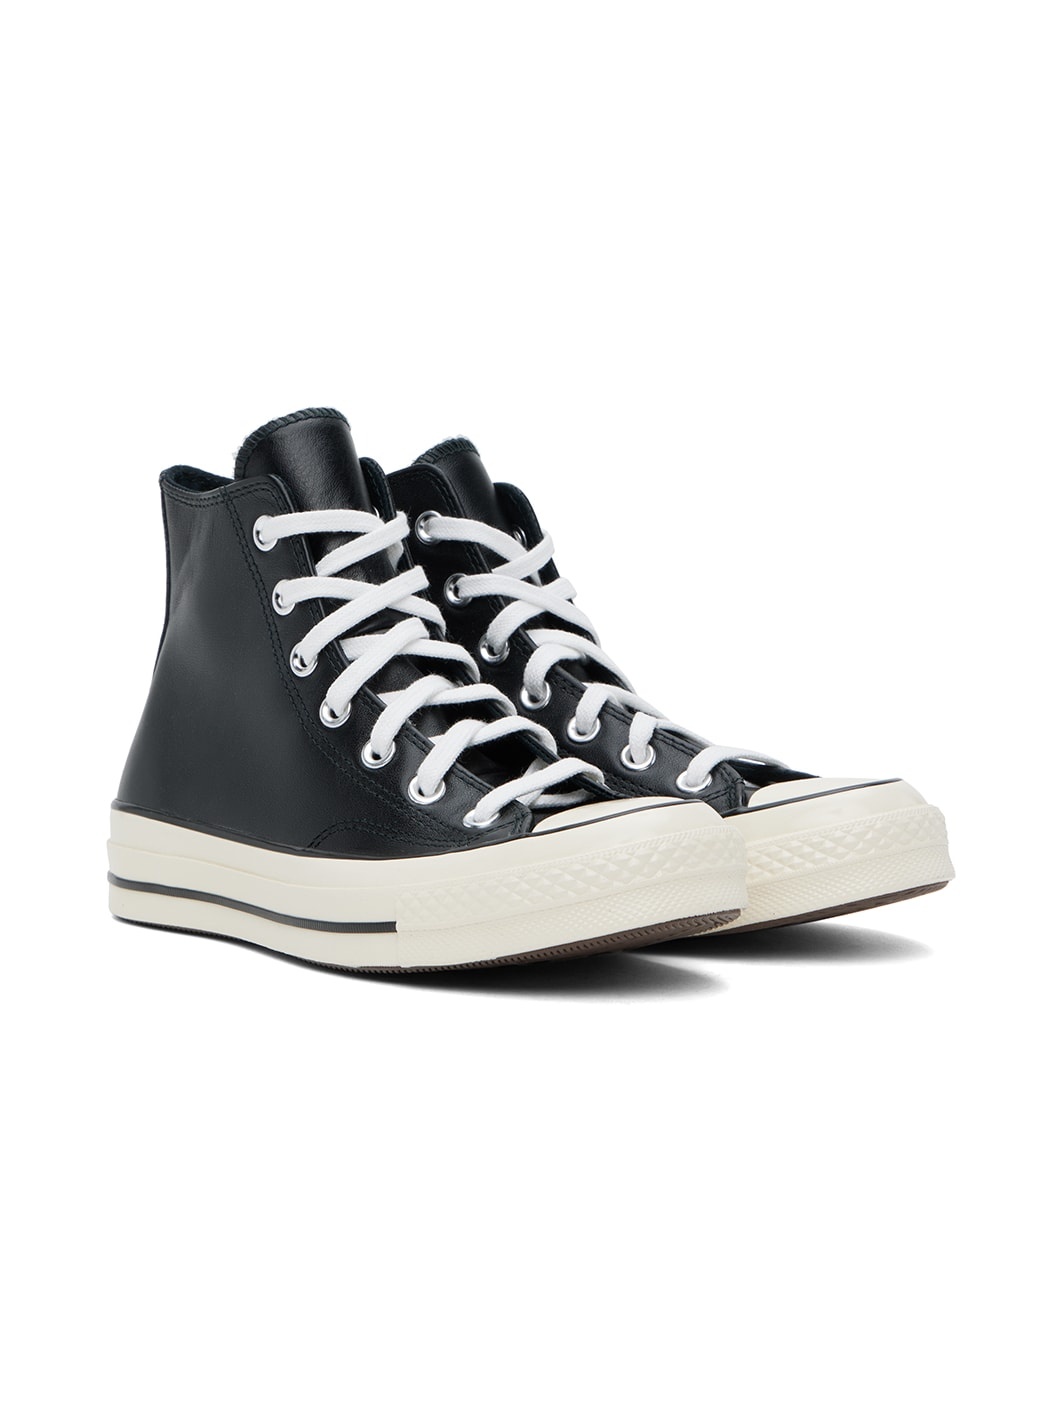 Black Chuck 70 Leather High Top Sneakers - 4